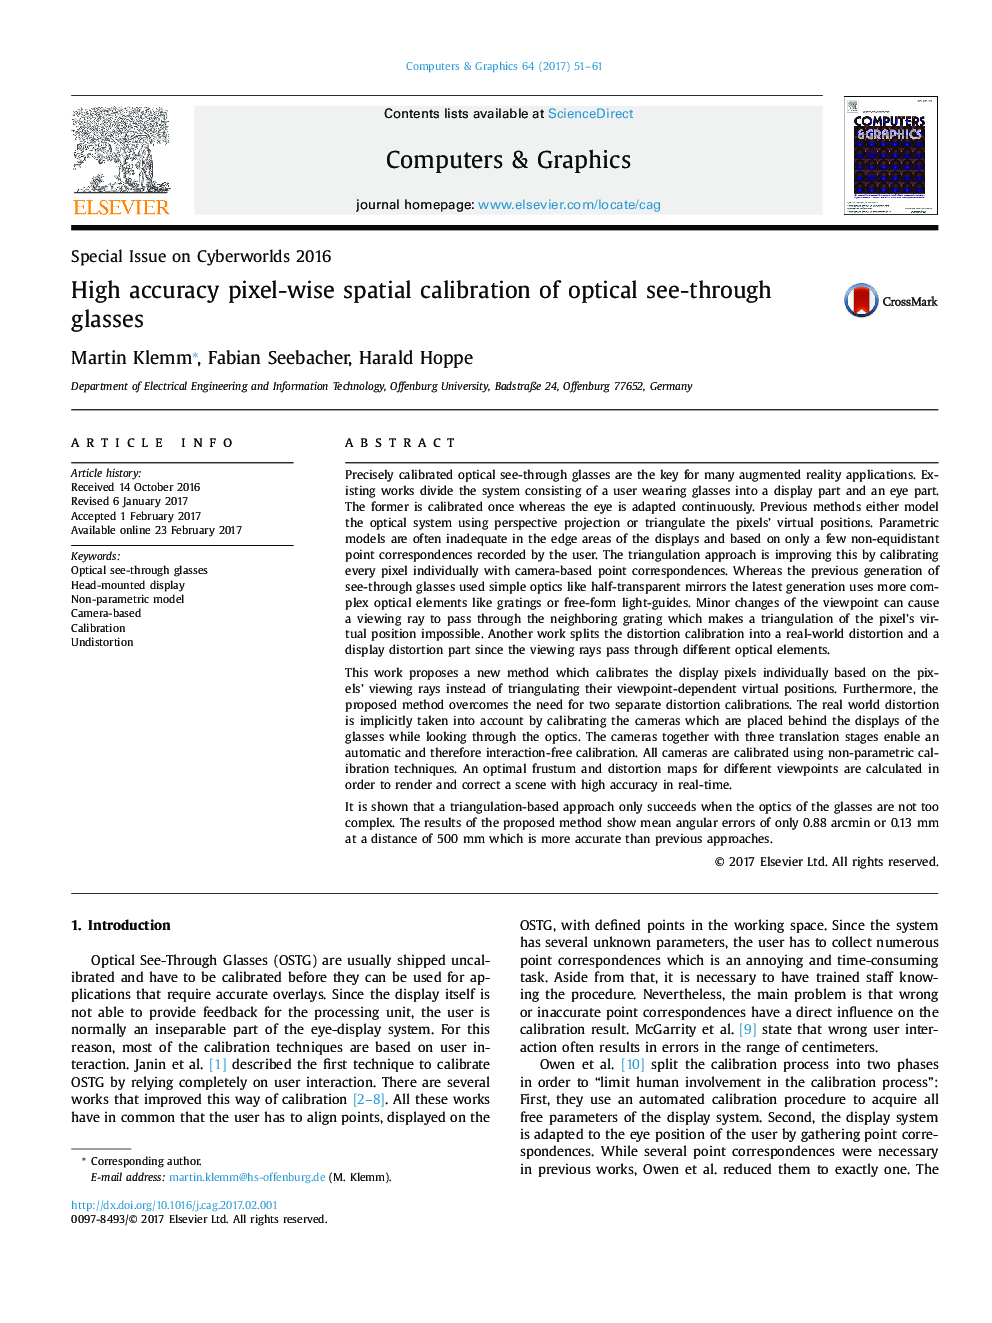 Special Issue on Cyberworlds 2016High accuracy pixel-wise spatial calibration of optical see-through glasses